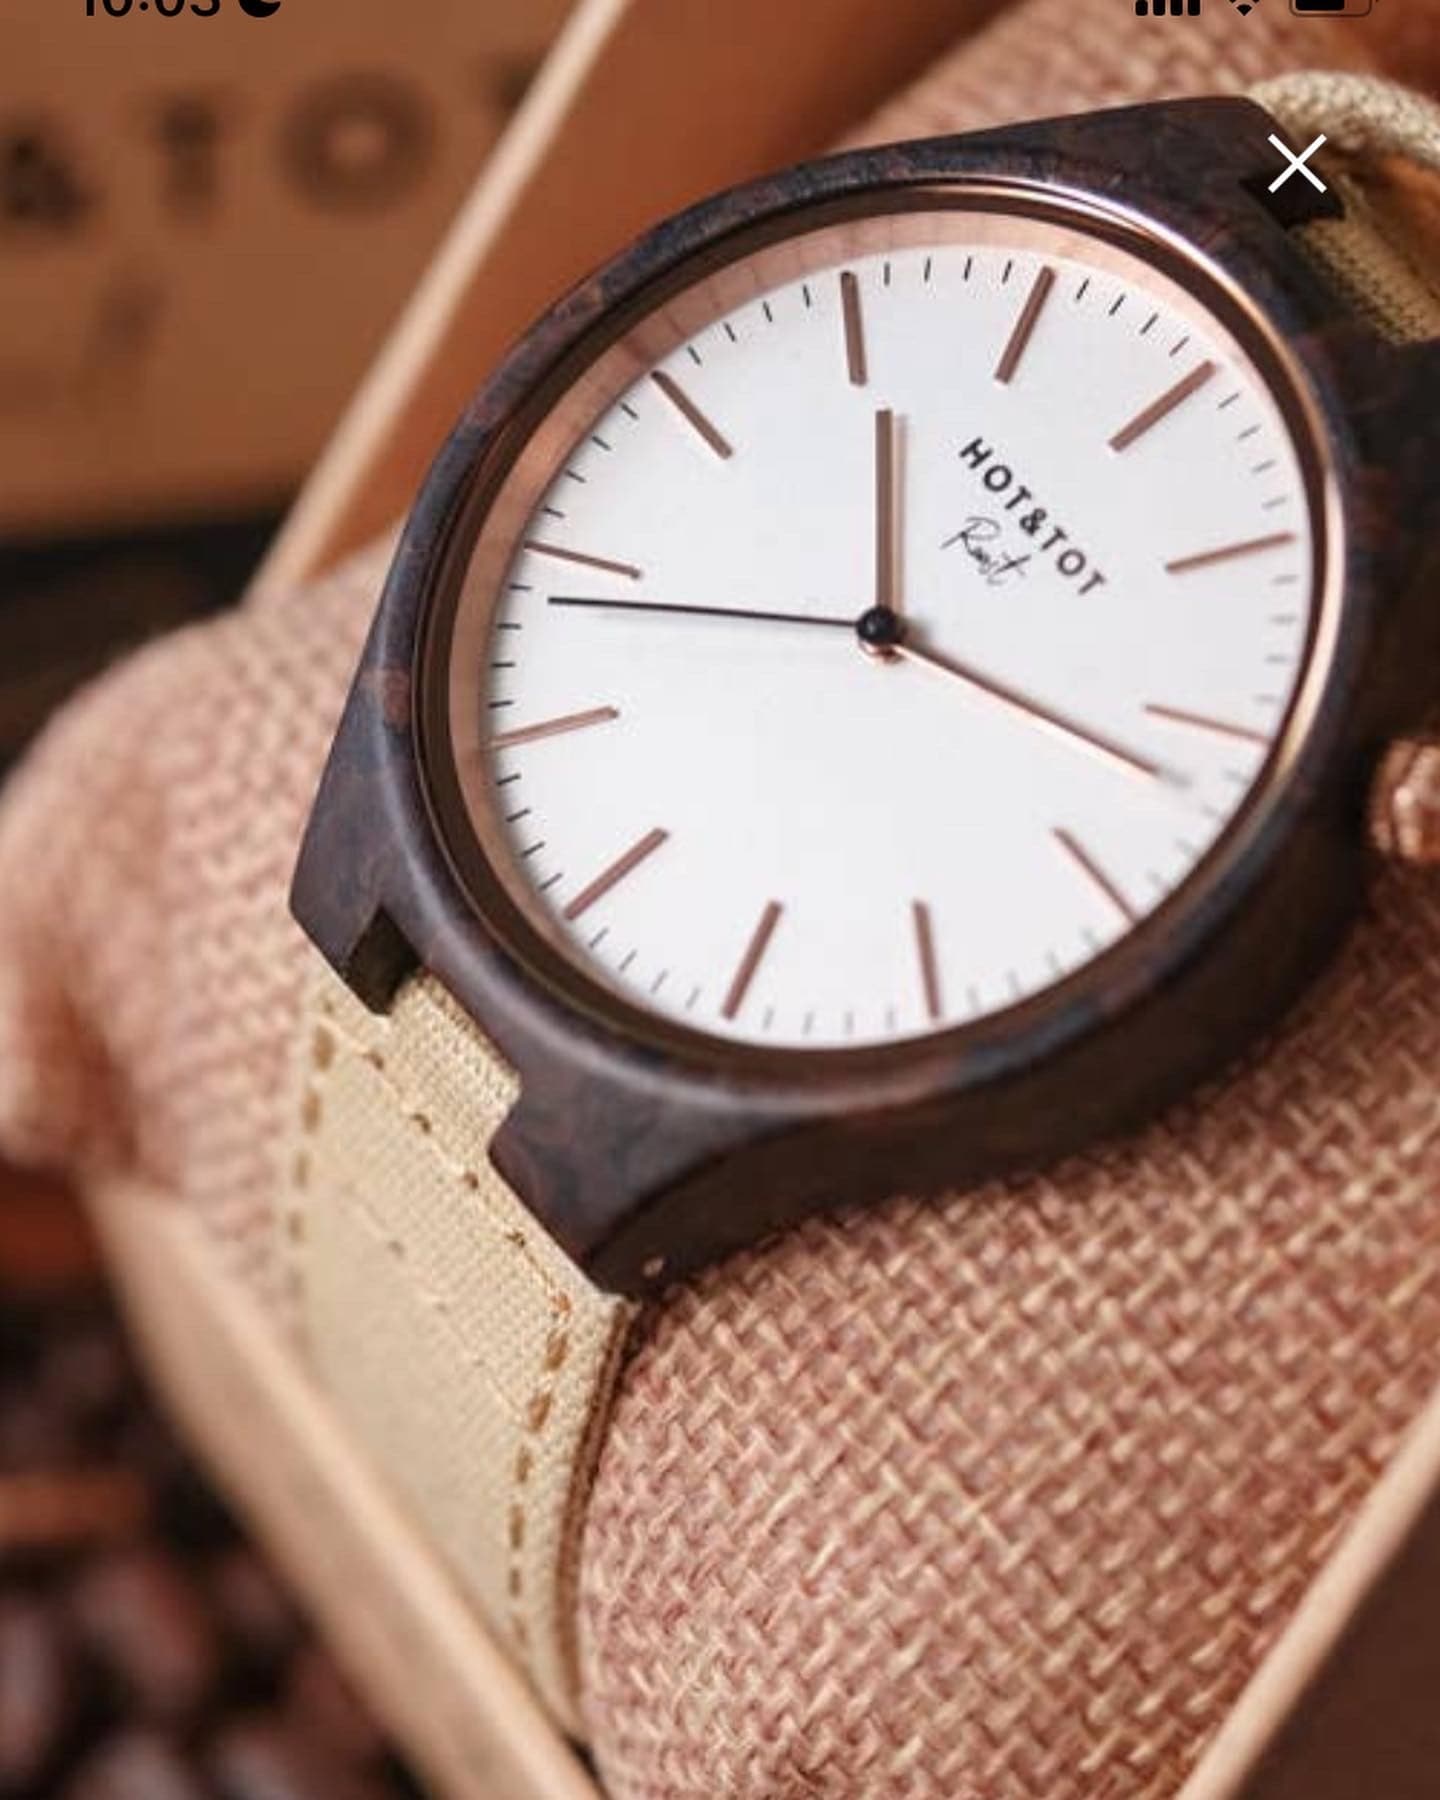 The Roast Unisex Watch from HOT&TOT